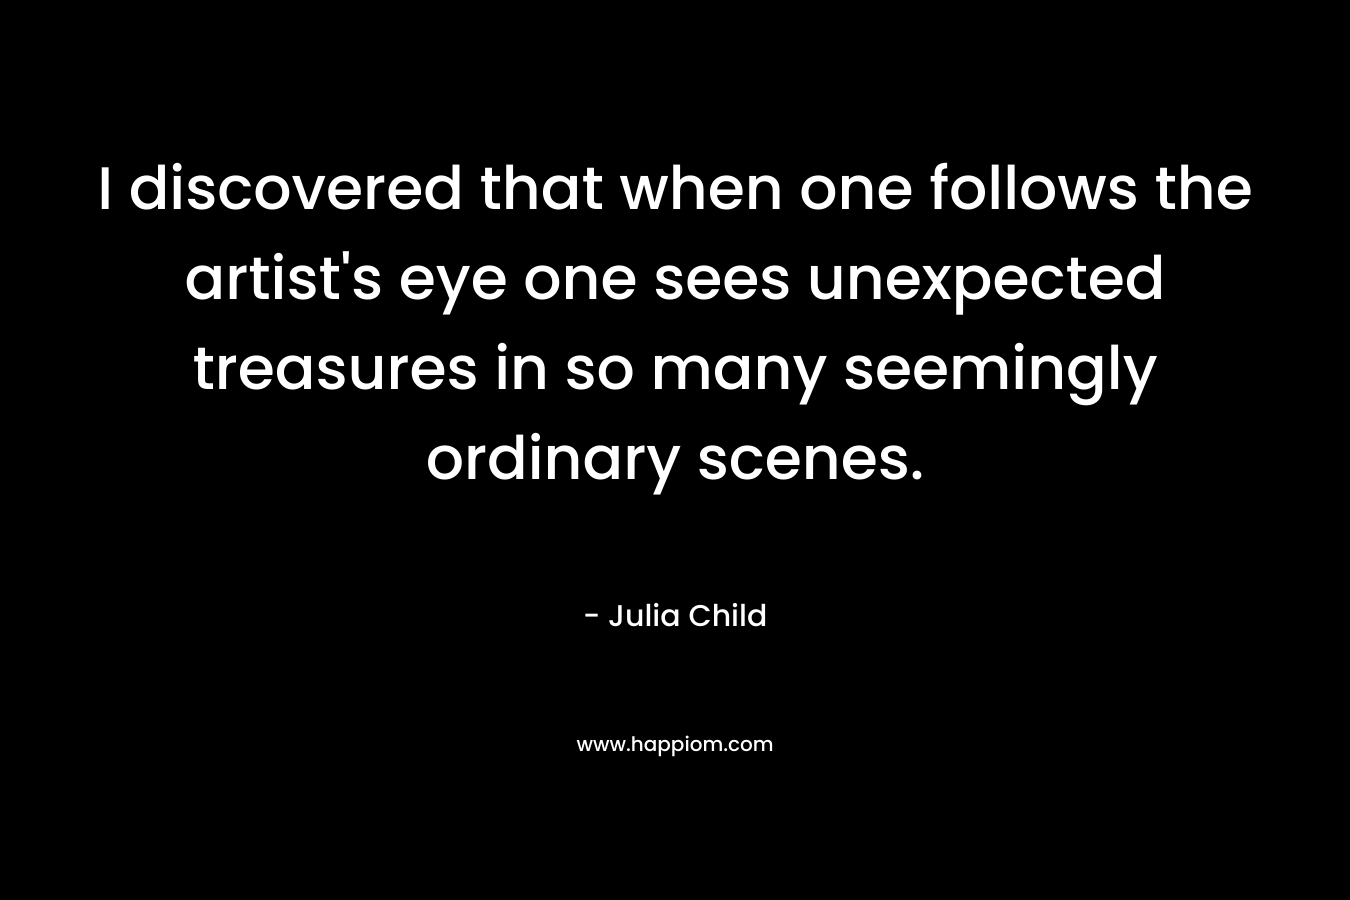 I discovered that when one follows the artist’s eye one sees unexpected treasures in so many seemingly ordinary scenes. – Julia Child